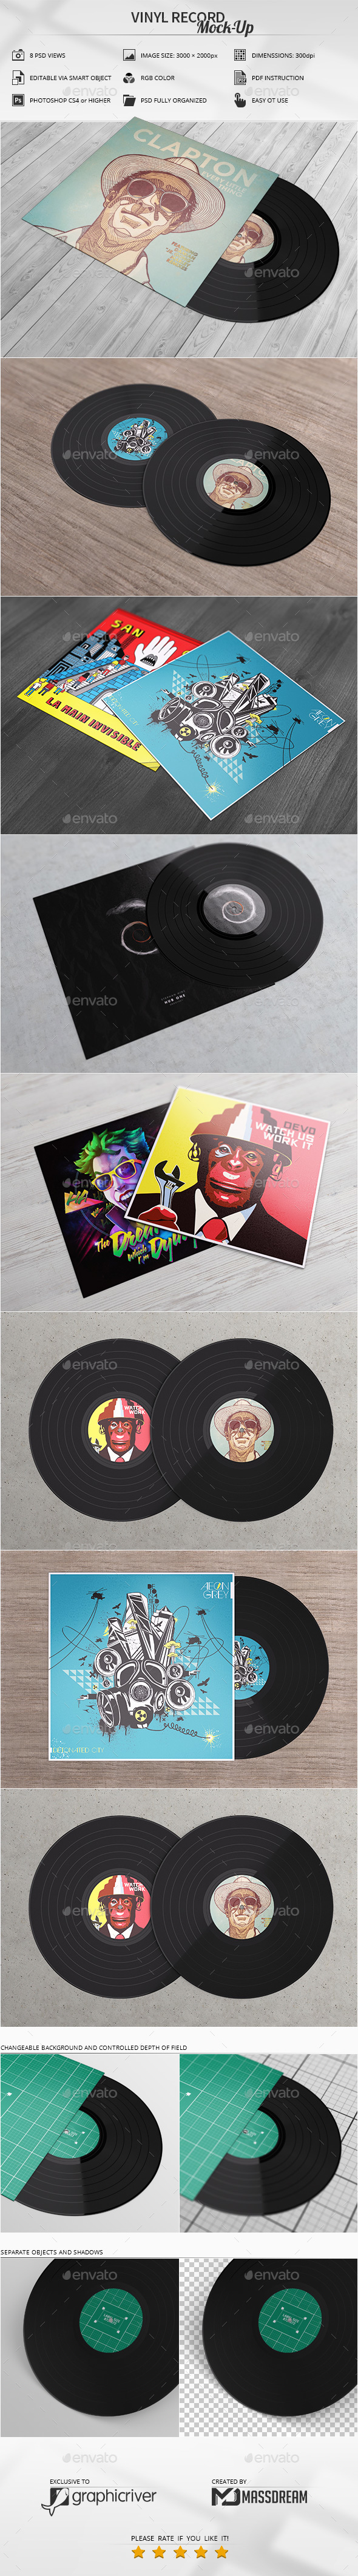 Download Vinyl Record Mock-Up by MassDream | GraphicRiver